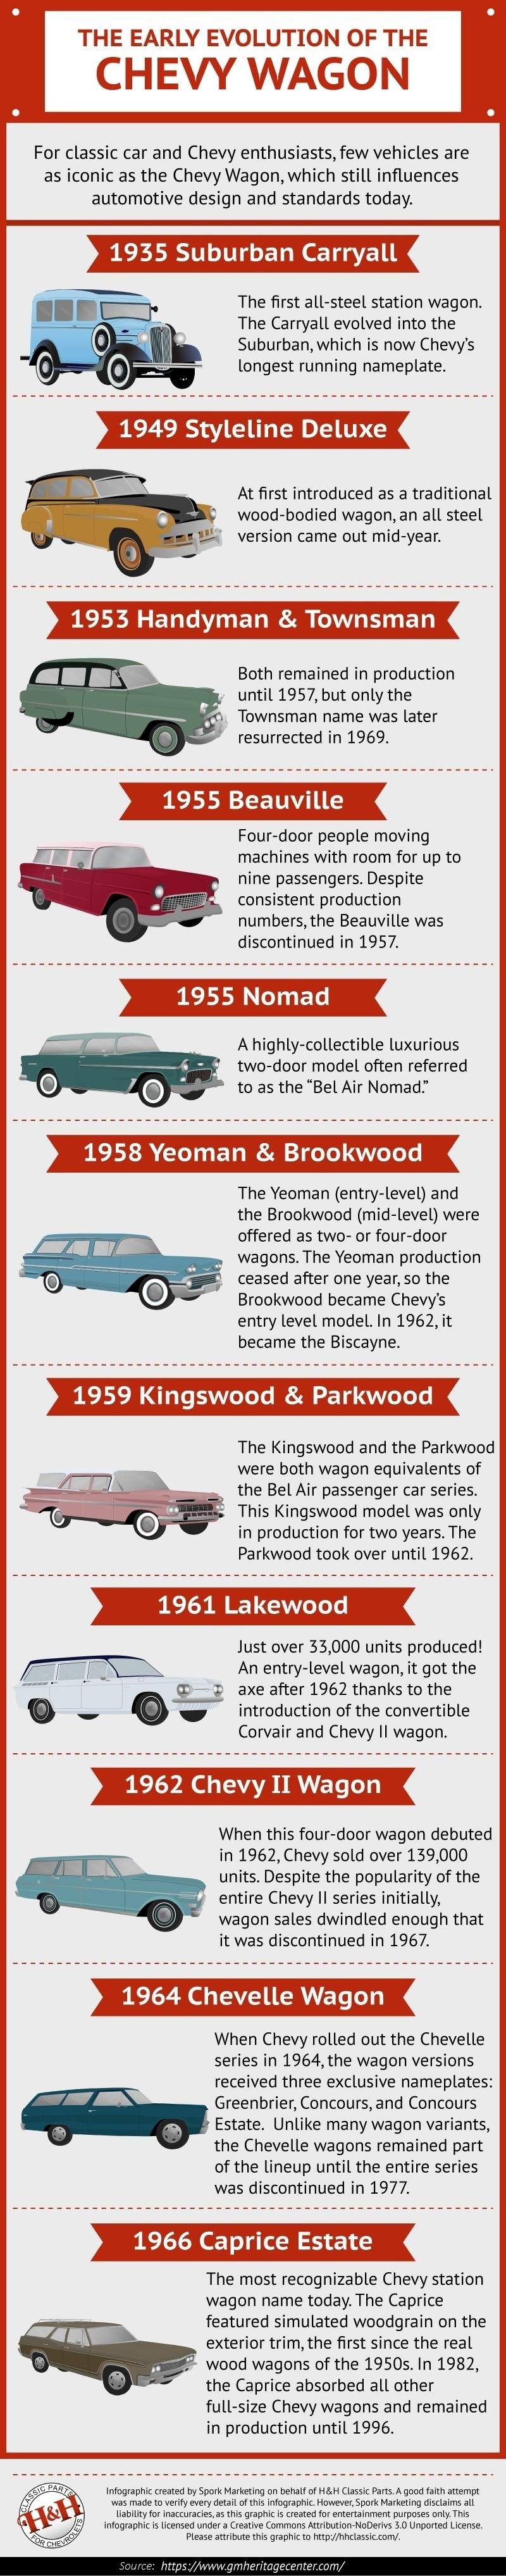 A brief history of the classic Chevrolet station wagon